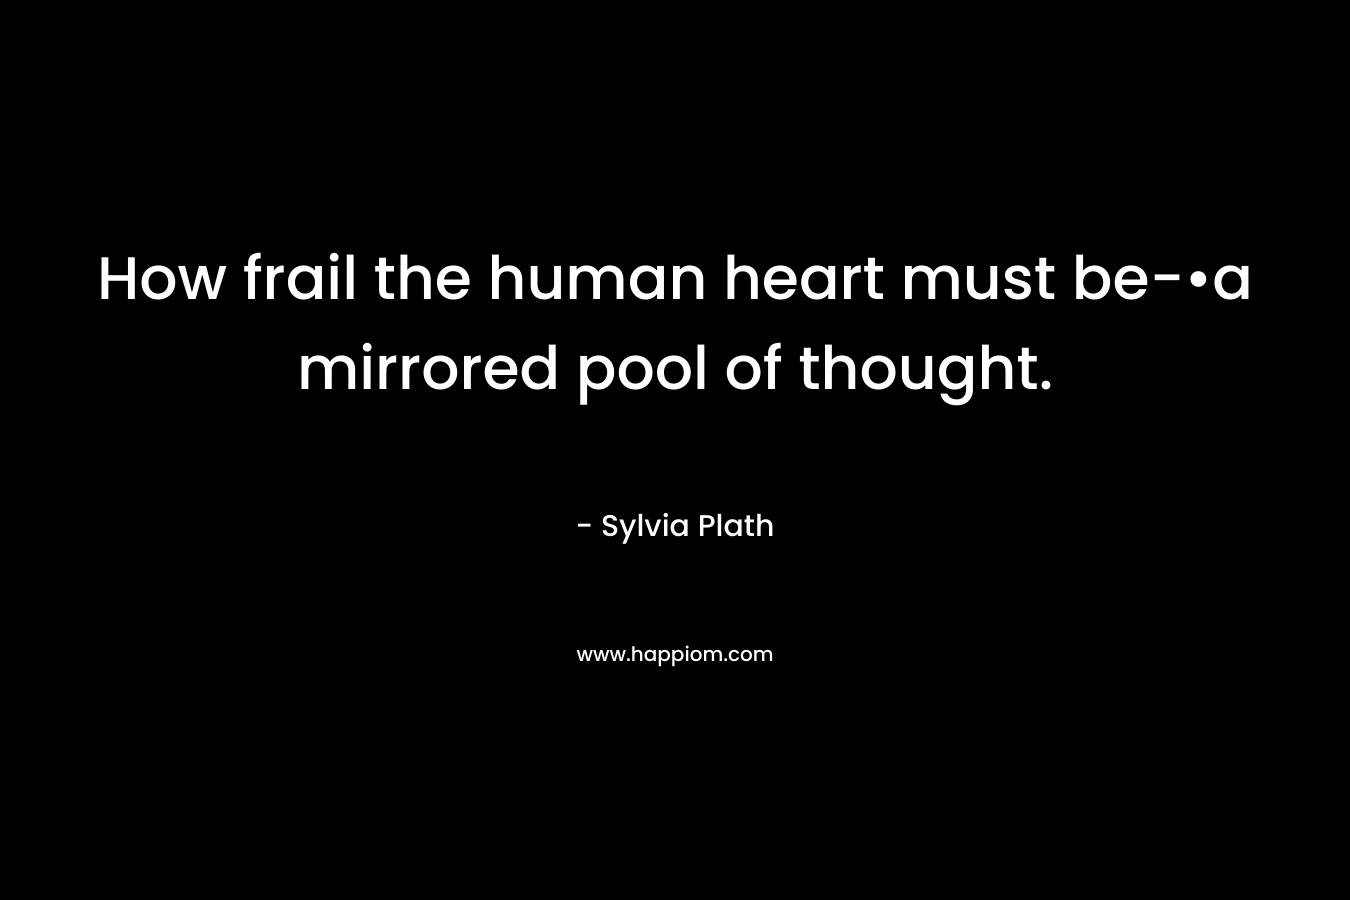 How frail the human heart must be-•a mirrored pool of thought. – Sylvia Plath